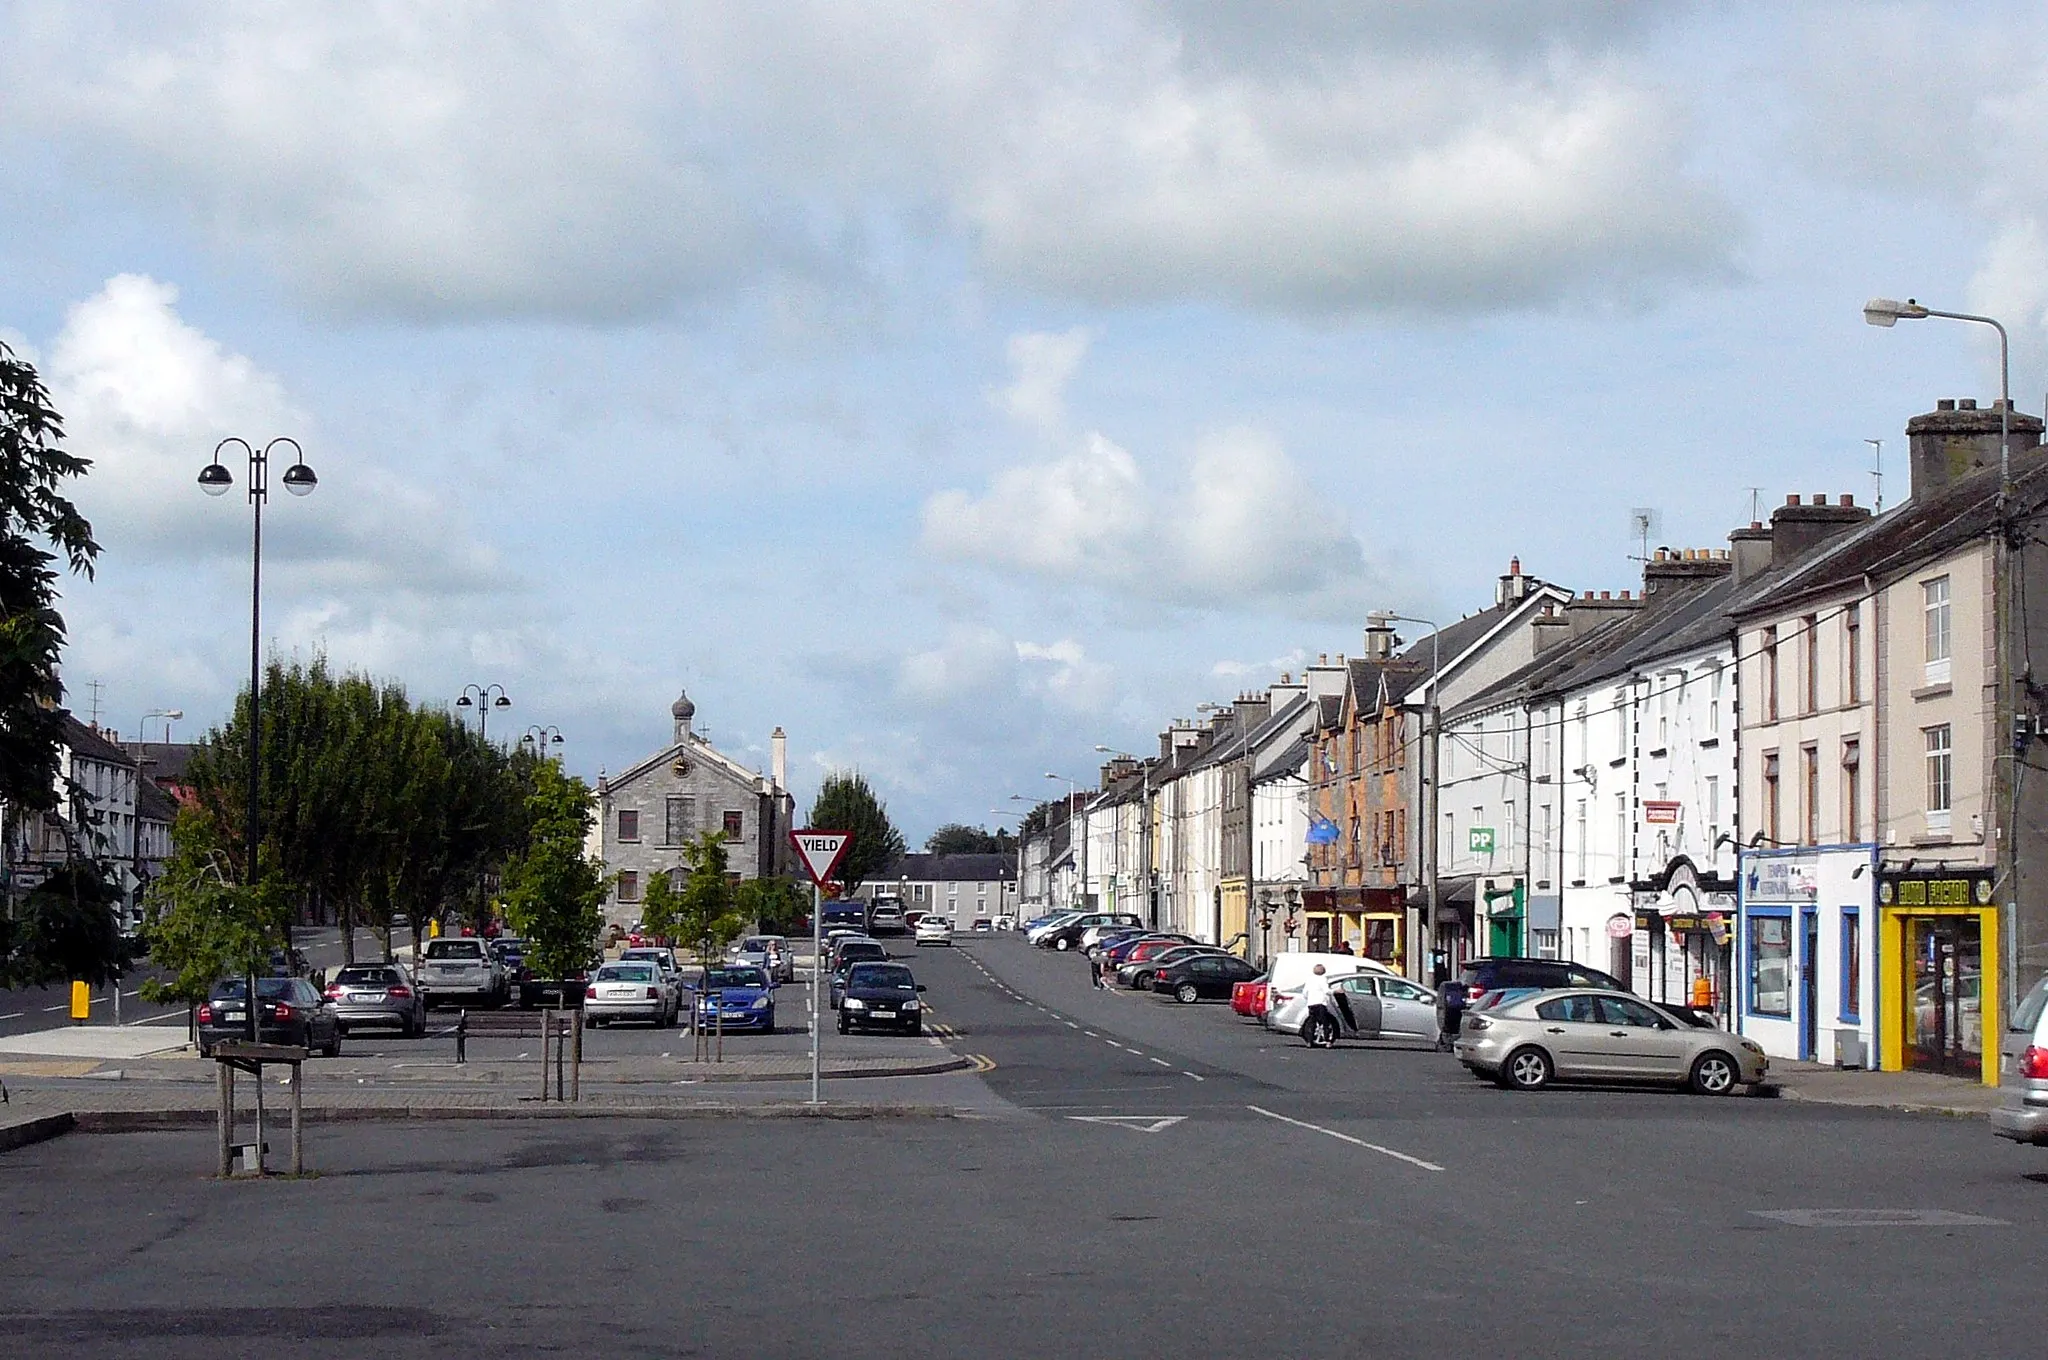 Photo showing: View of Main Street, Templemore, Co Tipperary, Ireland with Town Hall in the background. Image shows the residential south-west side of the main street, traffic running on a parallel street to the left.